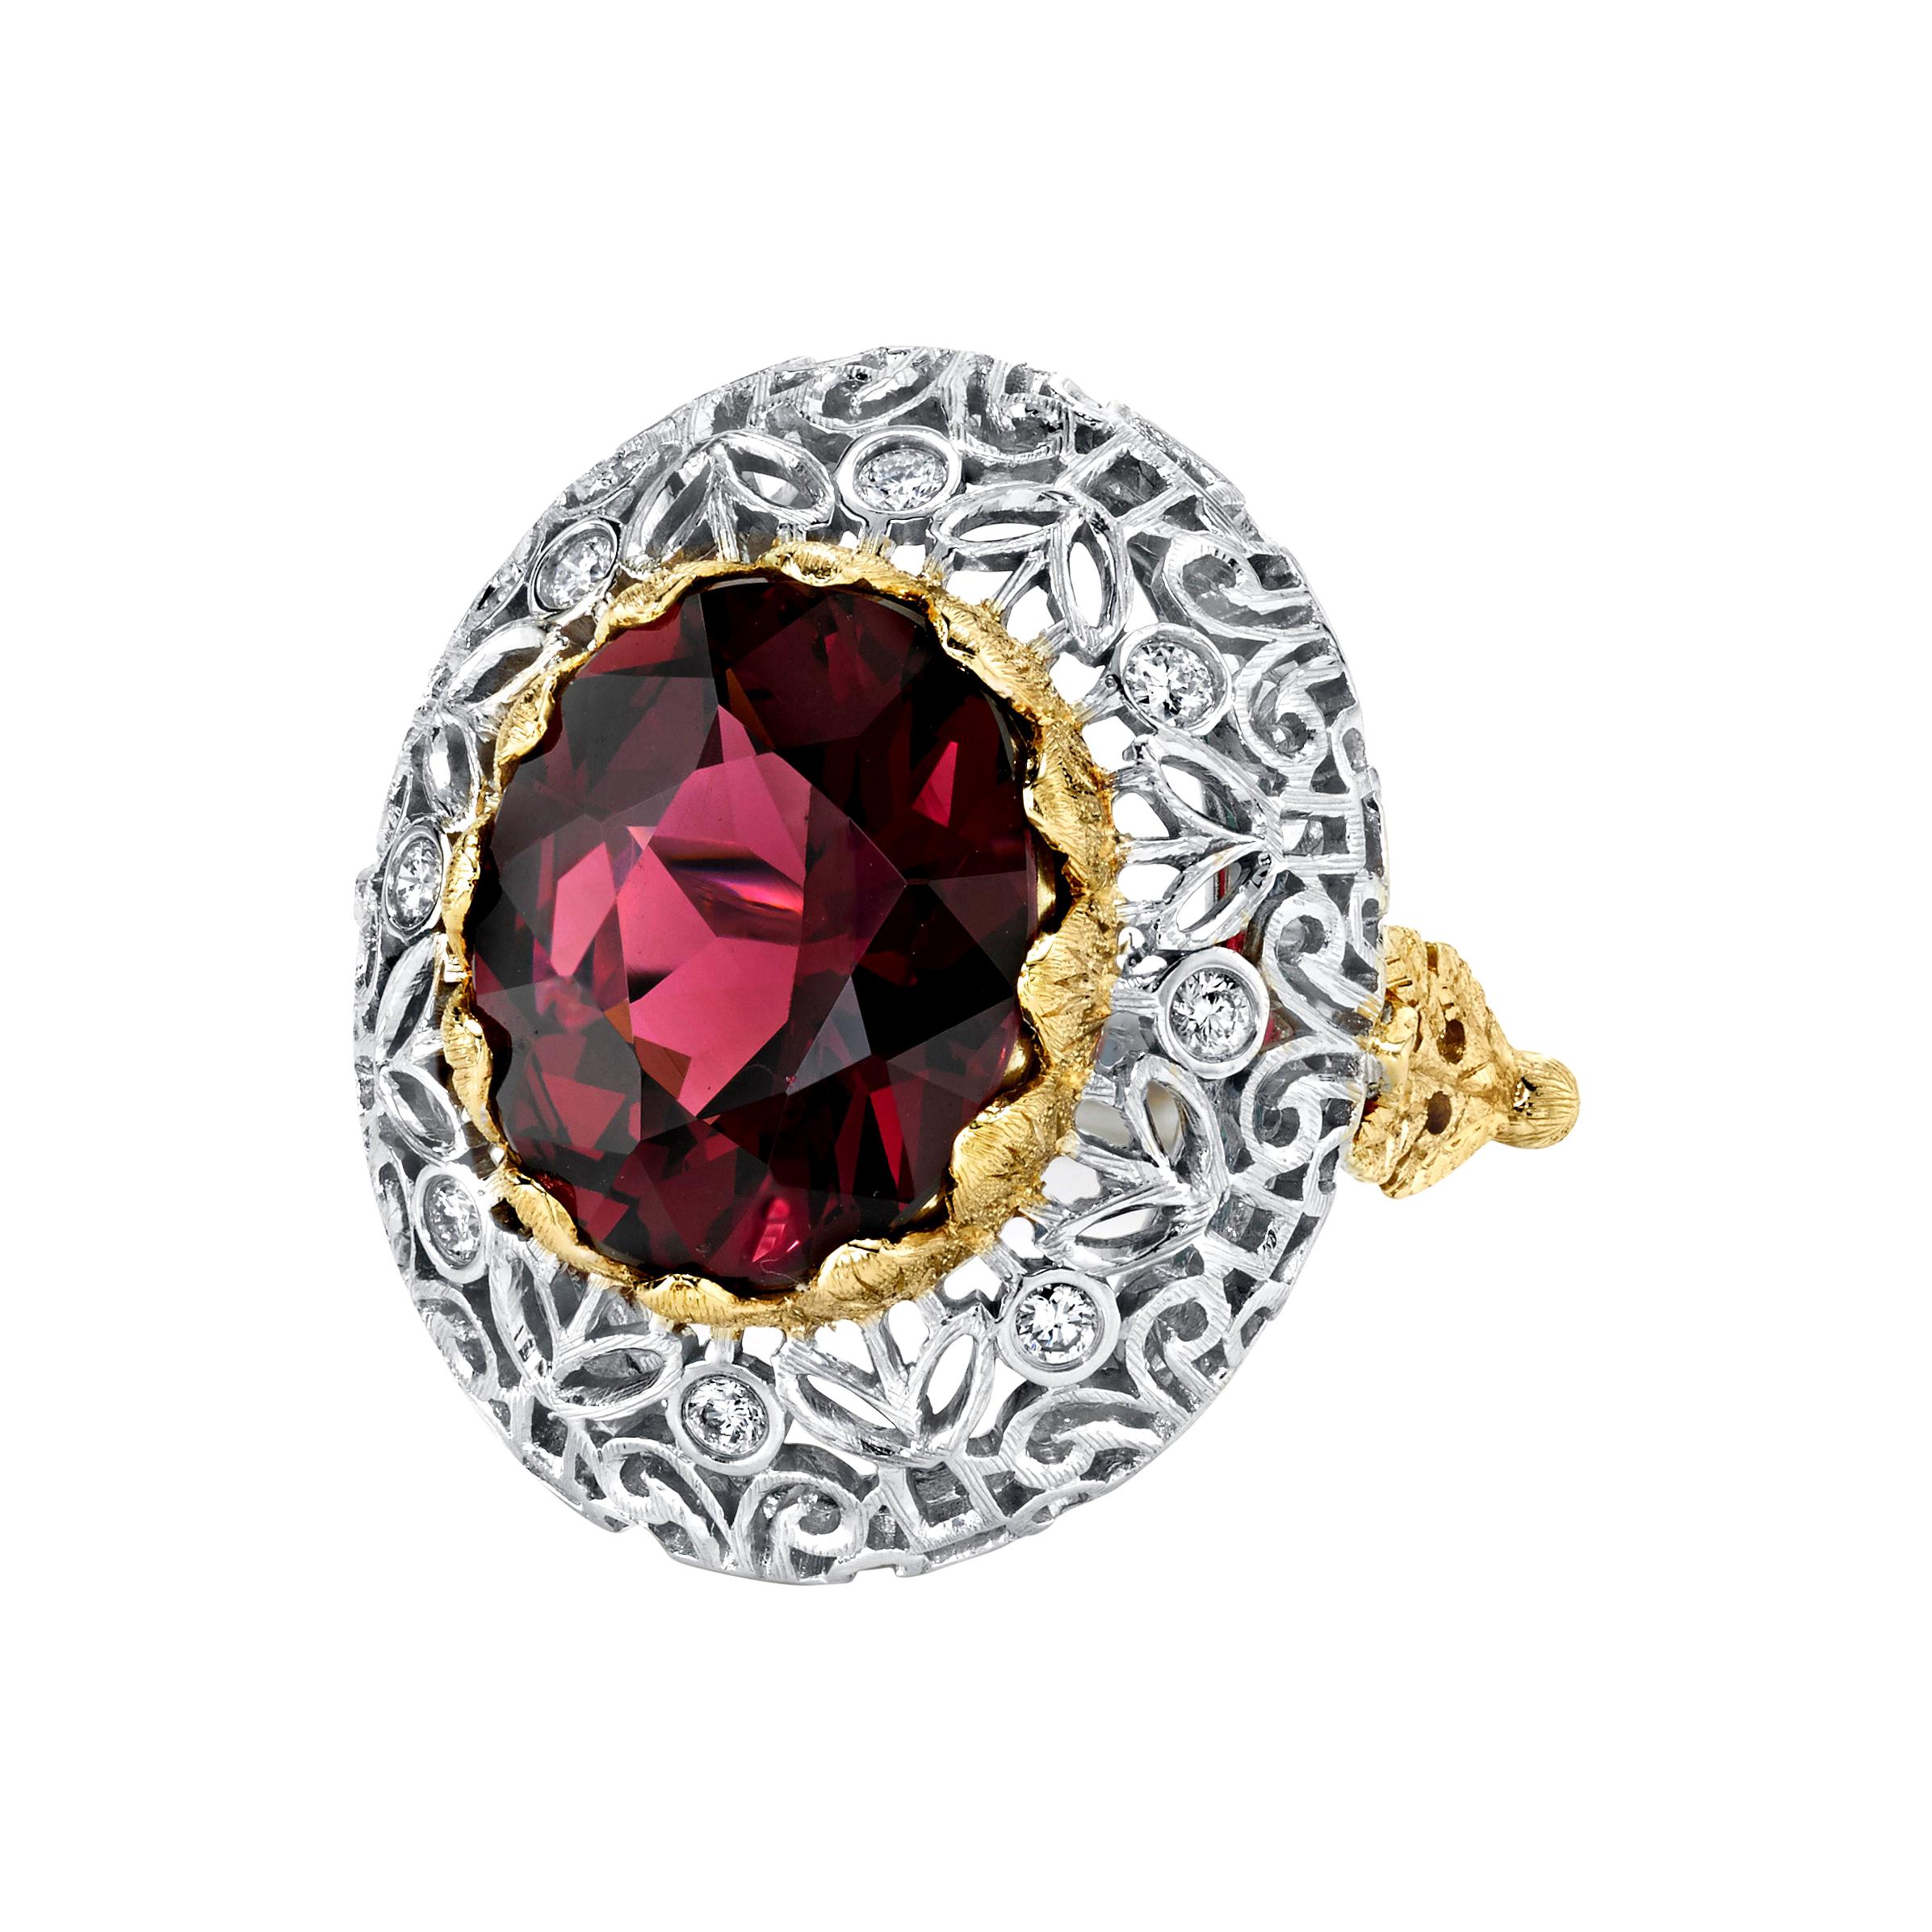 8.86 Carat Rhodolite Garnet and Diamond White and Yellow Gold Cocktail Ring